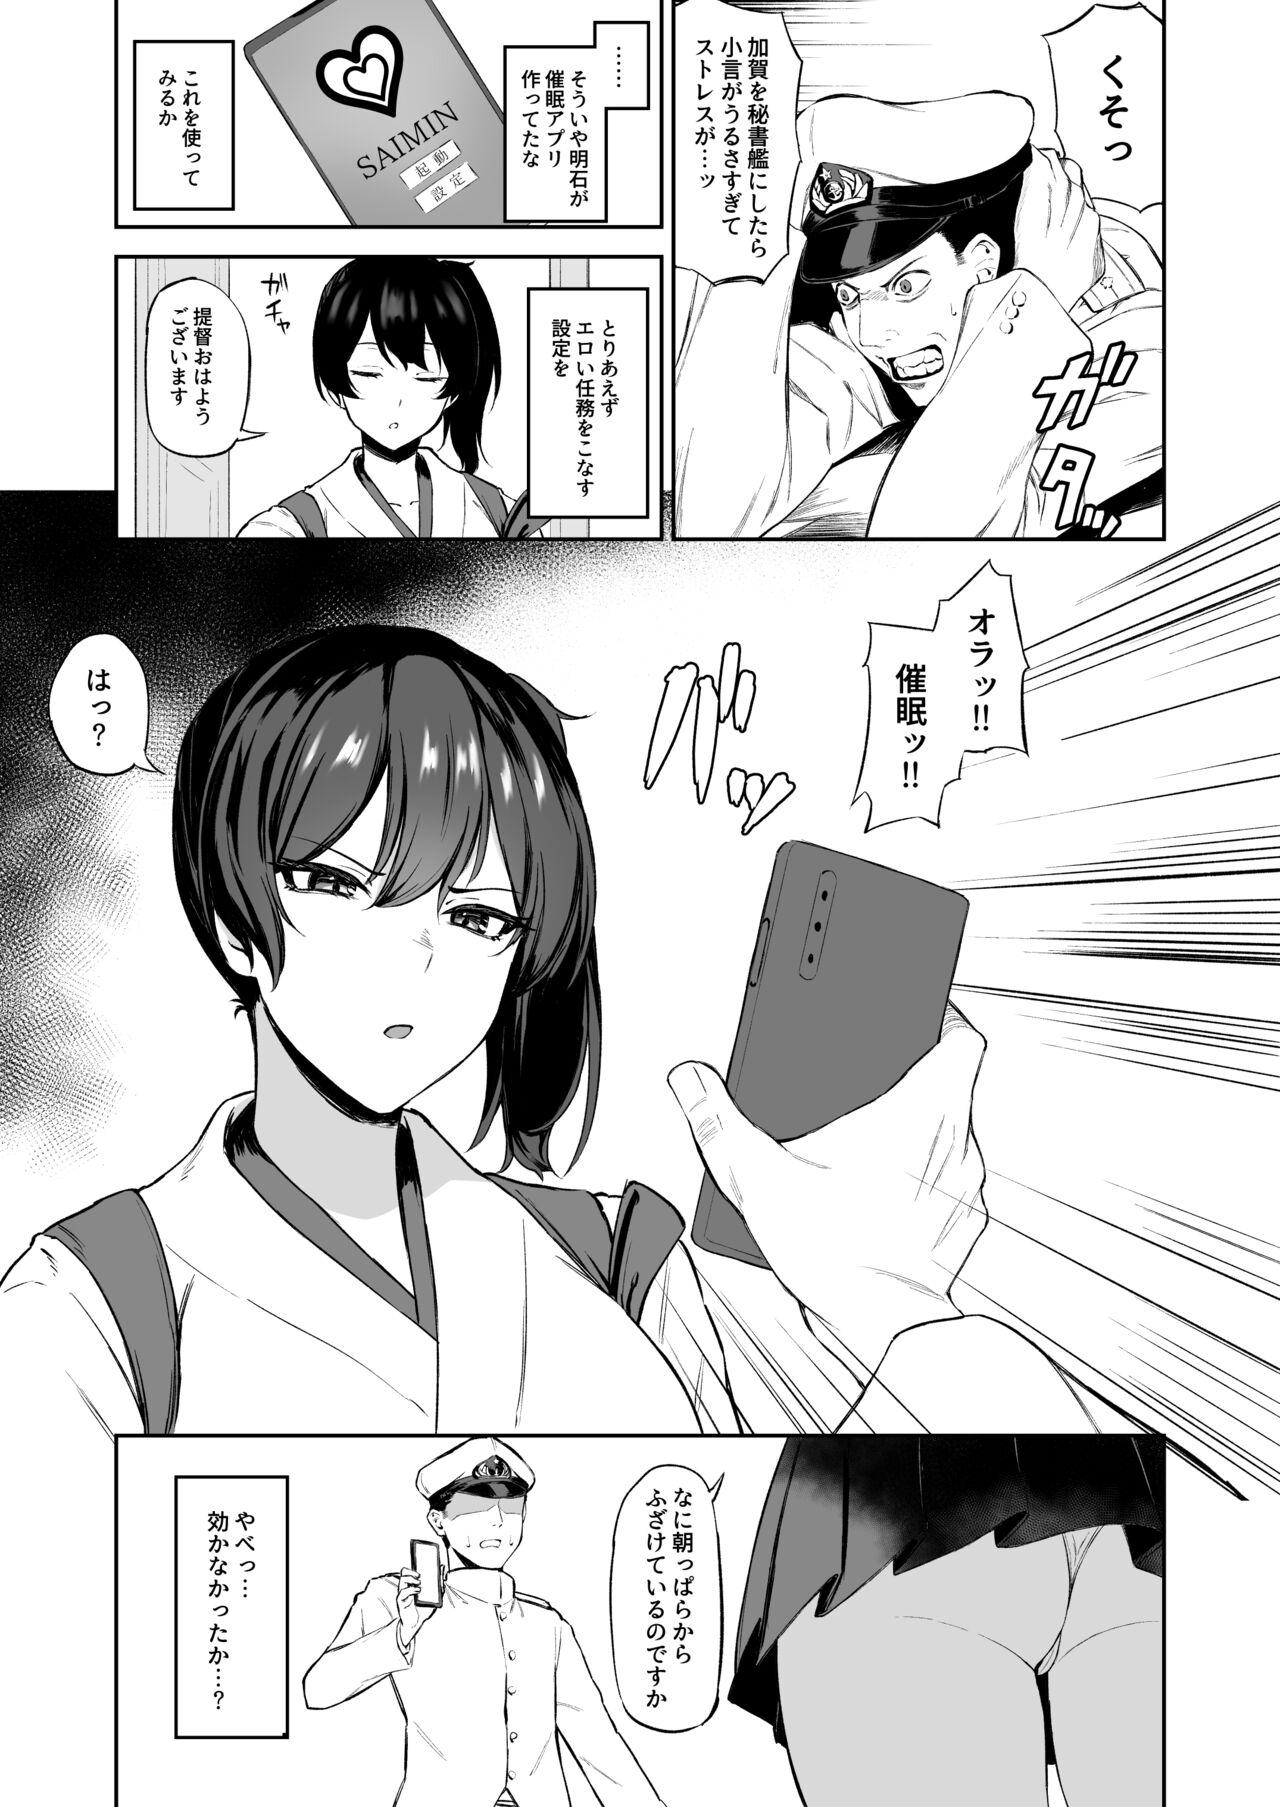 Massages 催眠加賀さん - Kantai collection Hiddencam - Picture 2